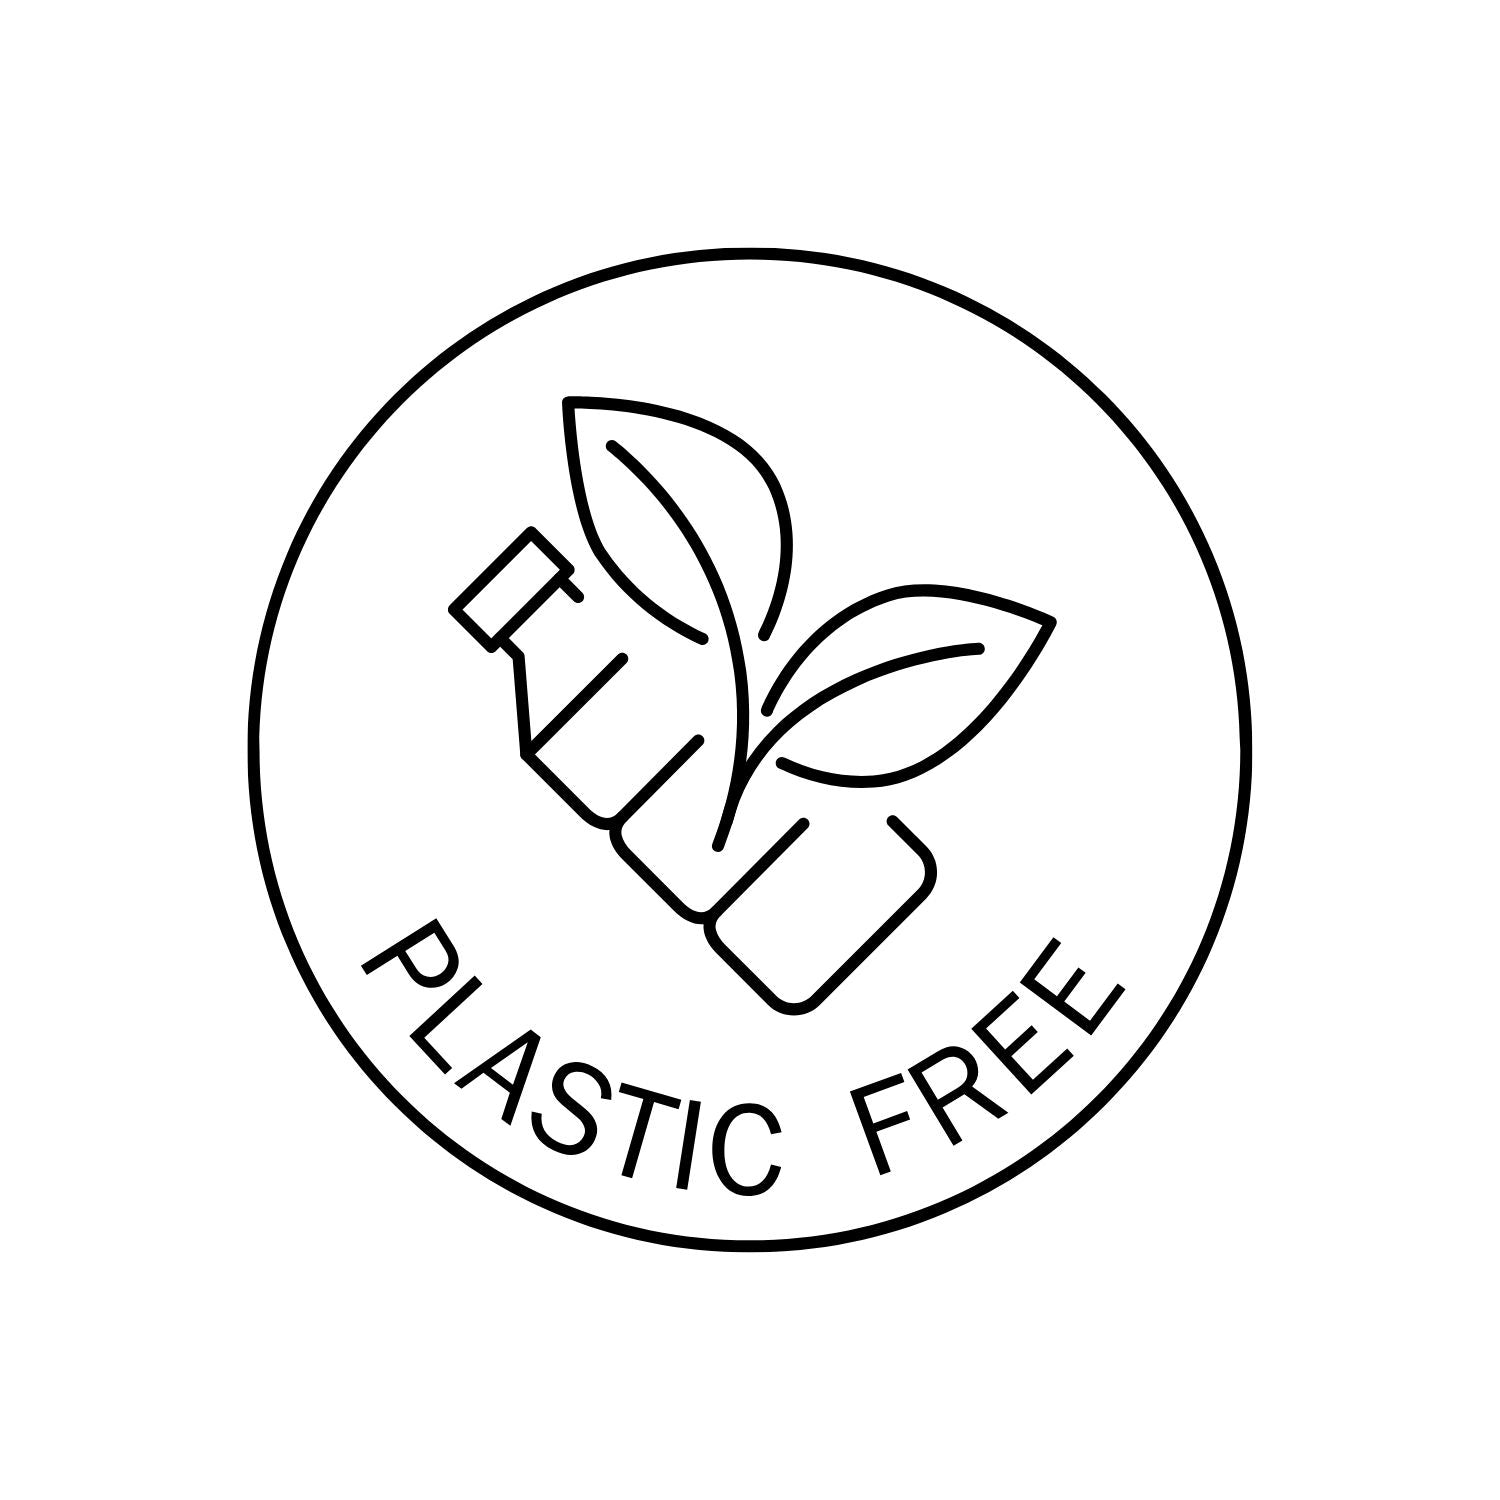 Why We Became A Plastic Free Business